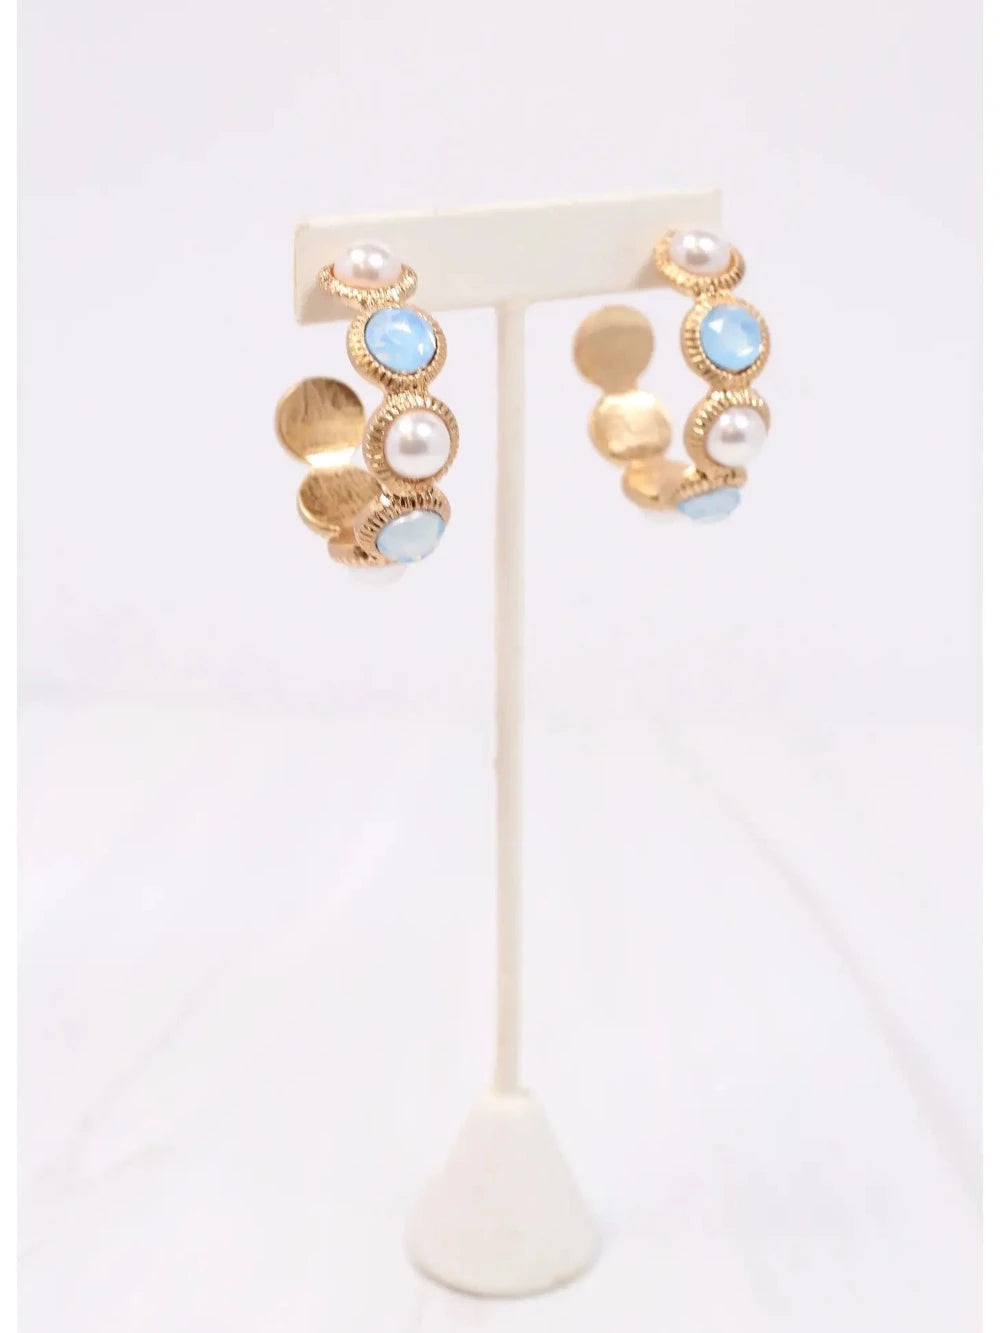 earrings on a stand